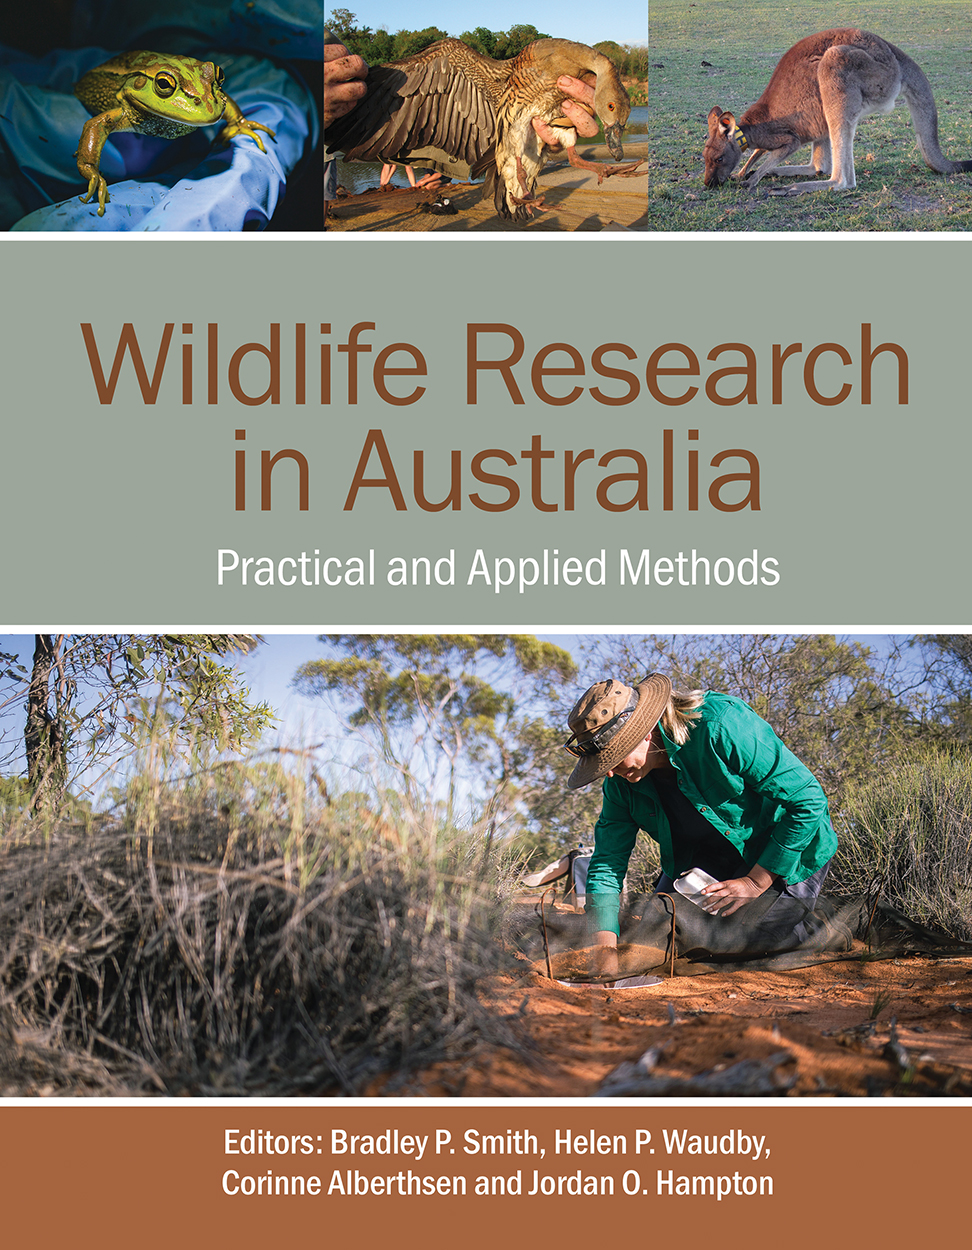 Cover of 'Wildlife Research in Australia', featuring a photo of a woman checking an animal trap in bushland, as well as images of a frog in gloved han